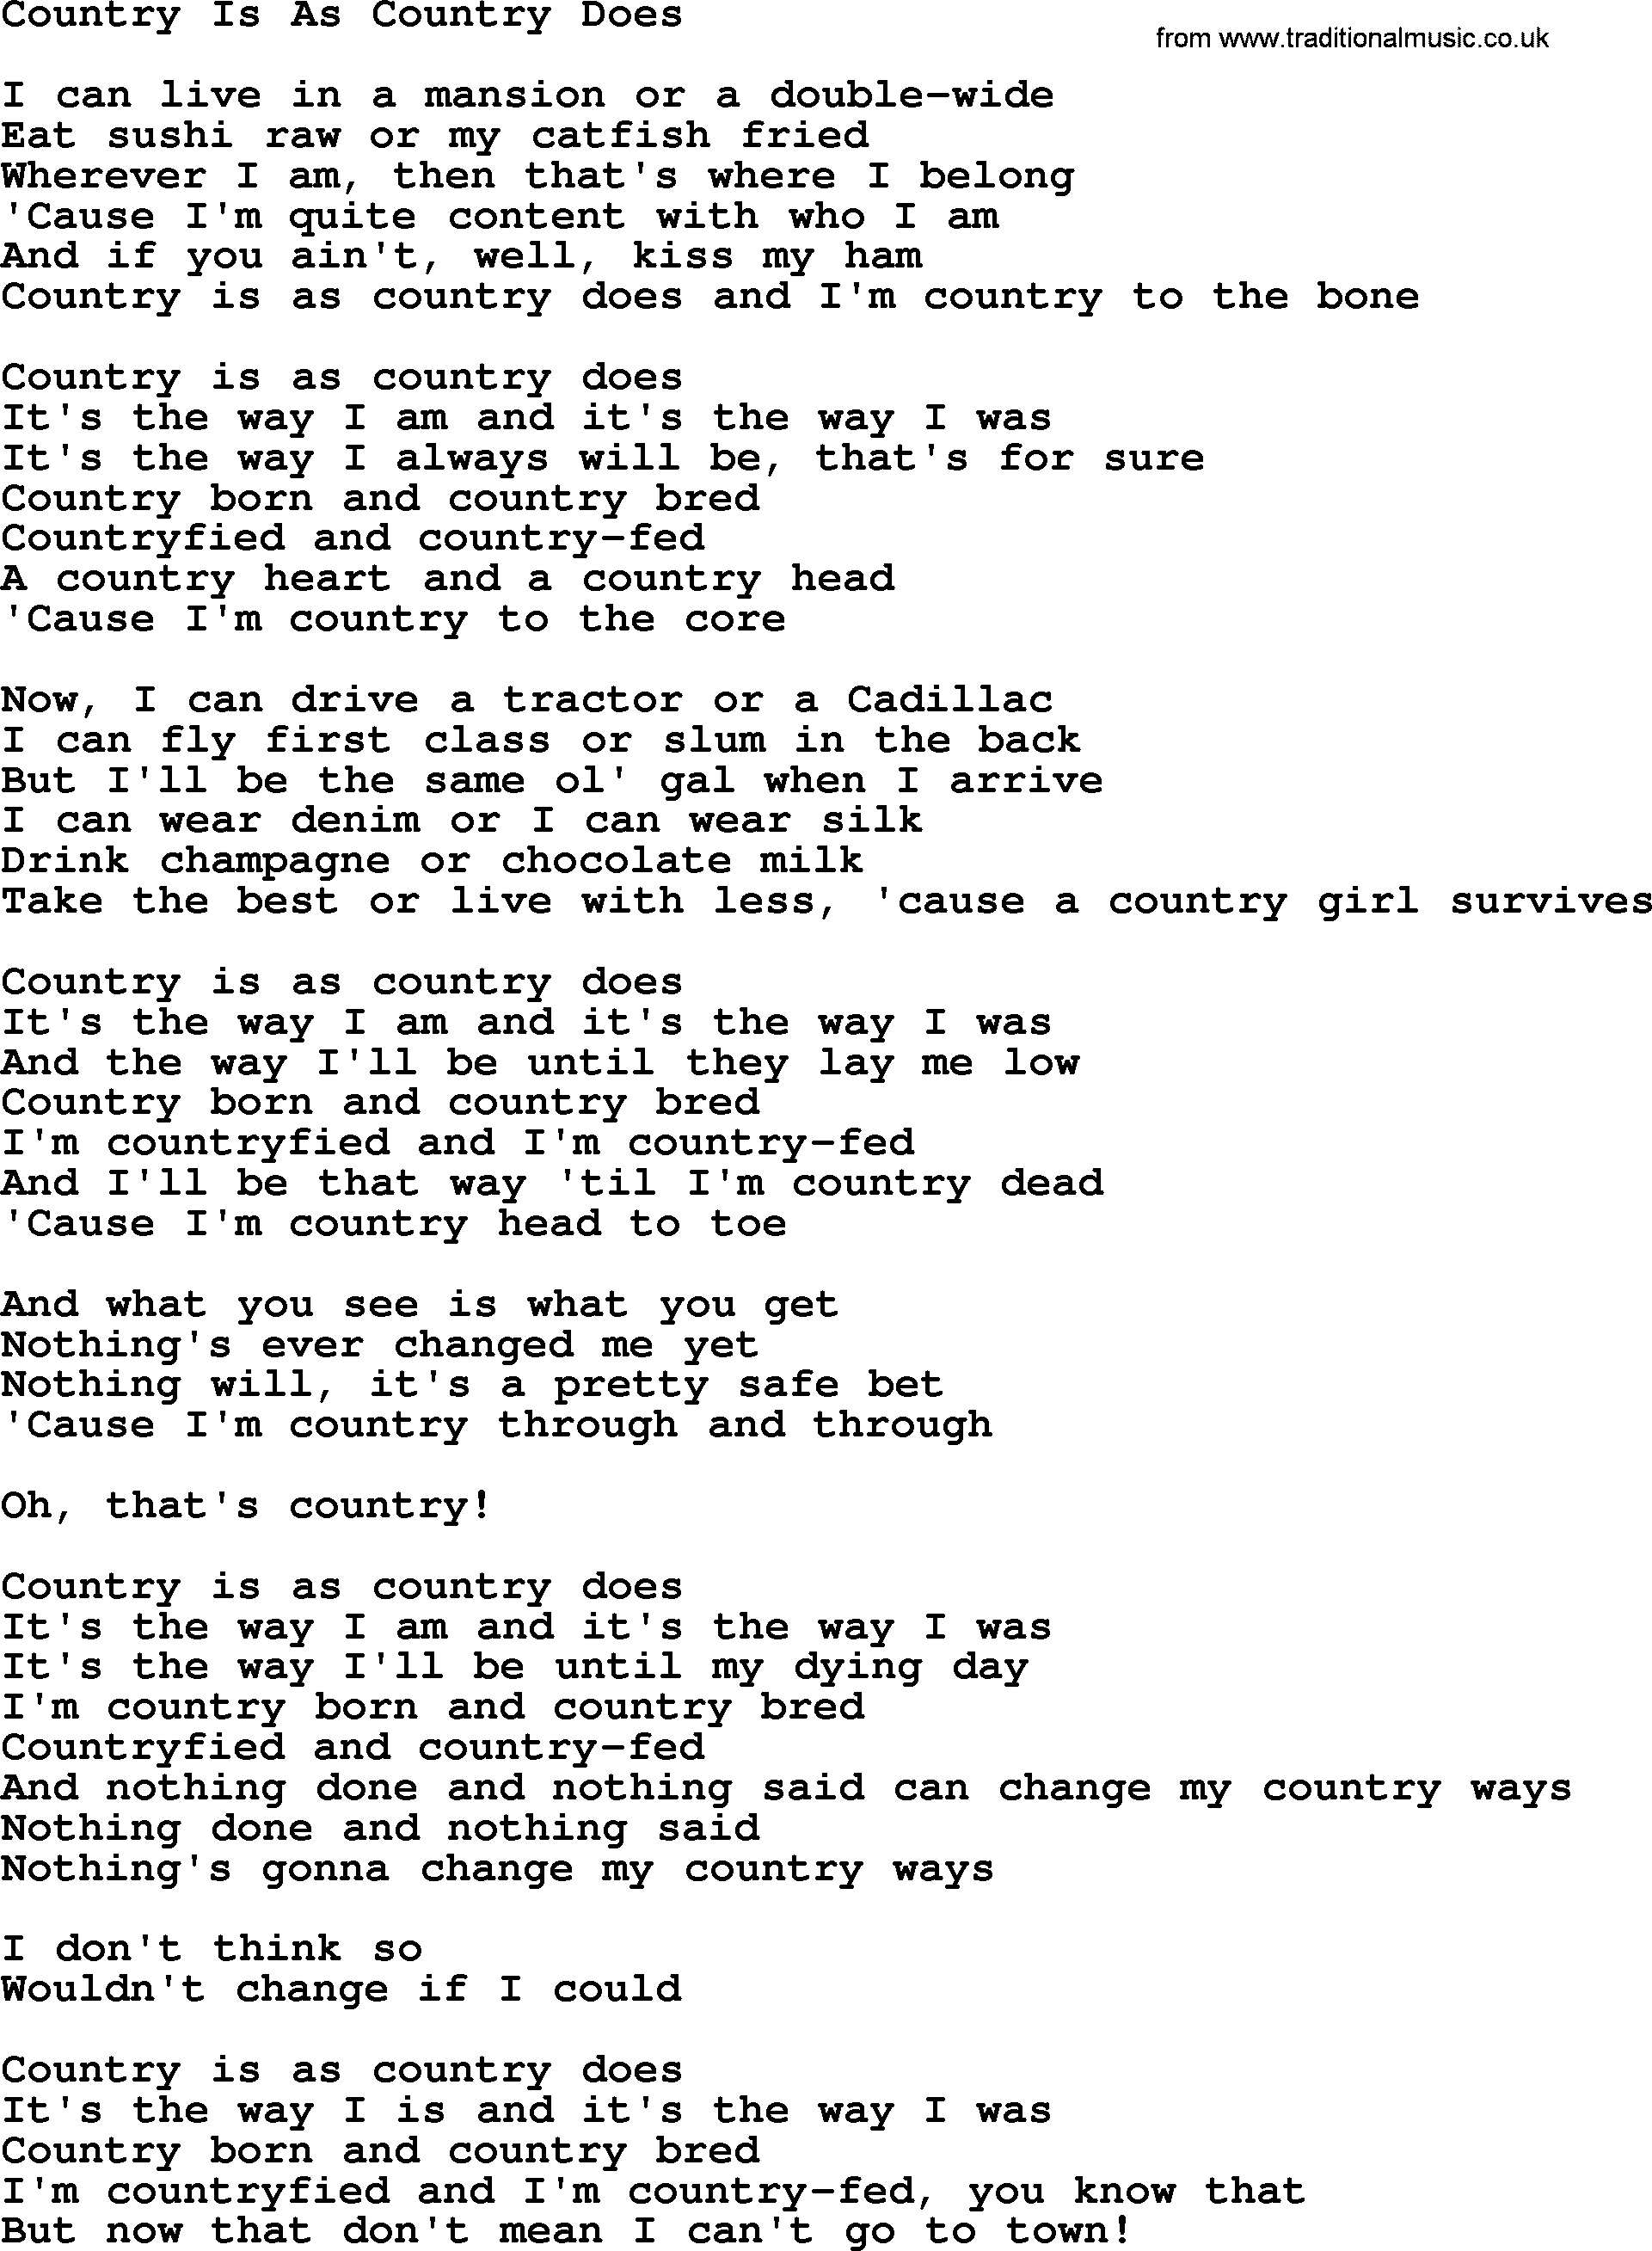 Dolly Parton song Country Is As Country Does.txt lyrics